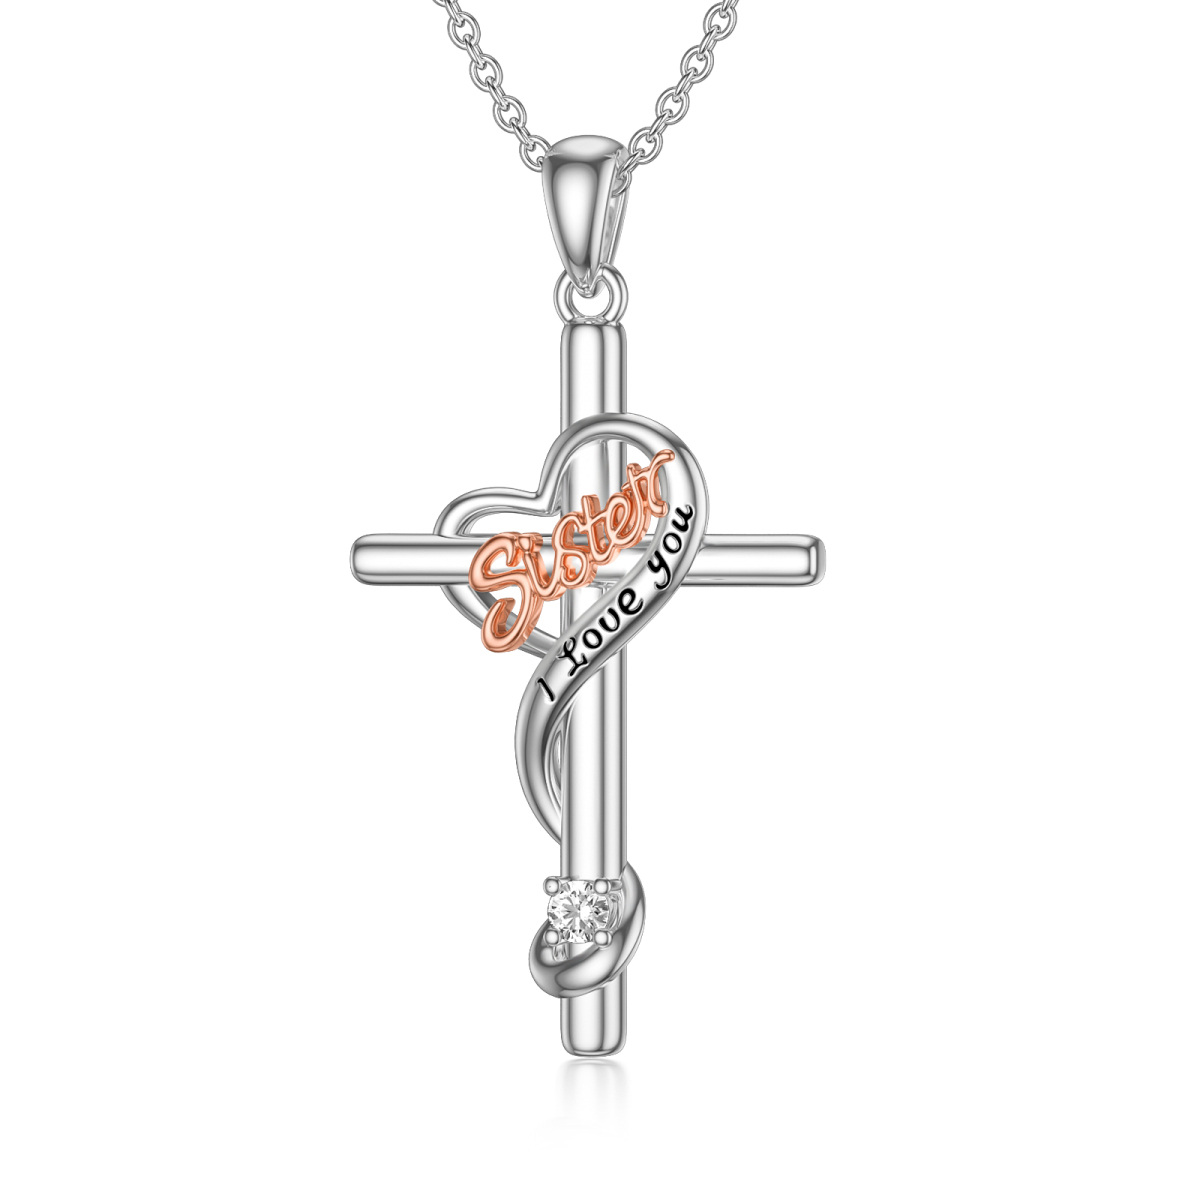 I LOVE YOU Sterling Silver Cross Pendant Necklace as Birthday Gift for Sister-1